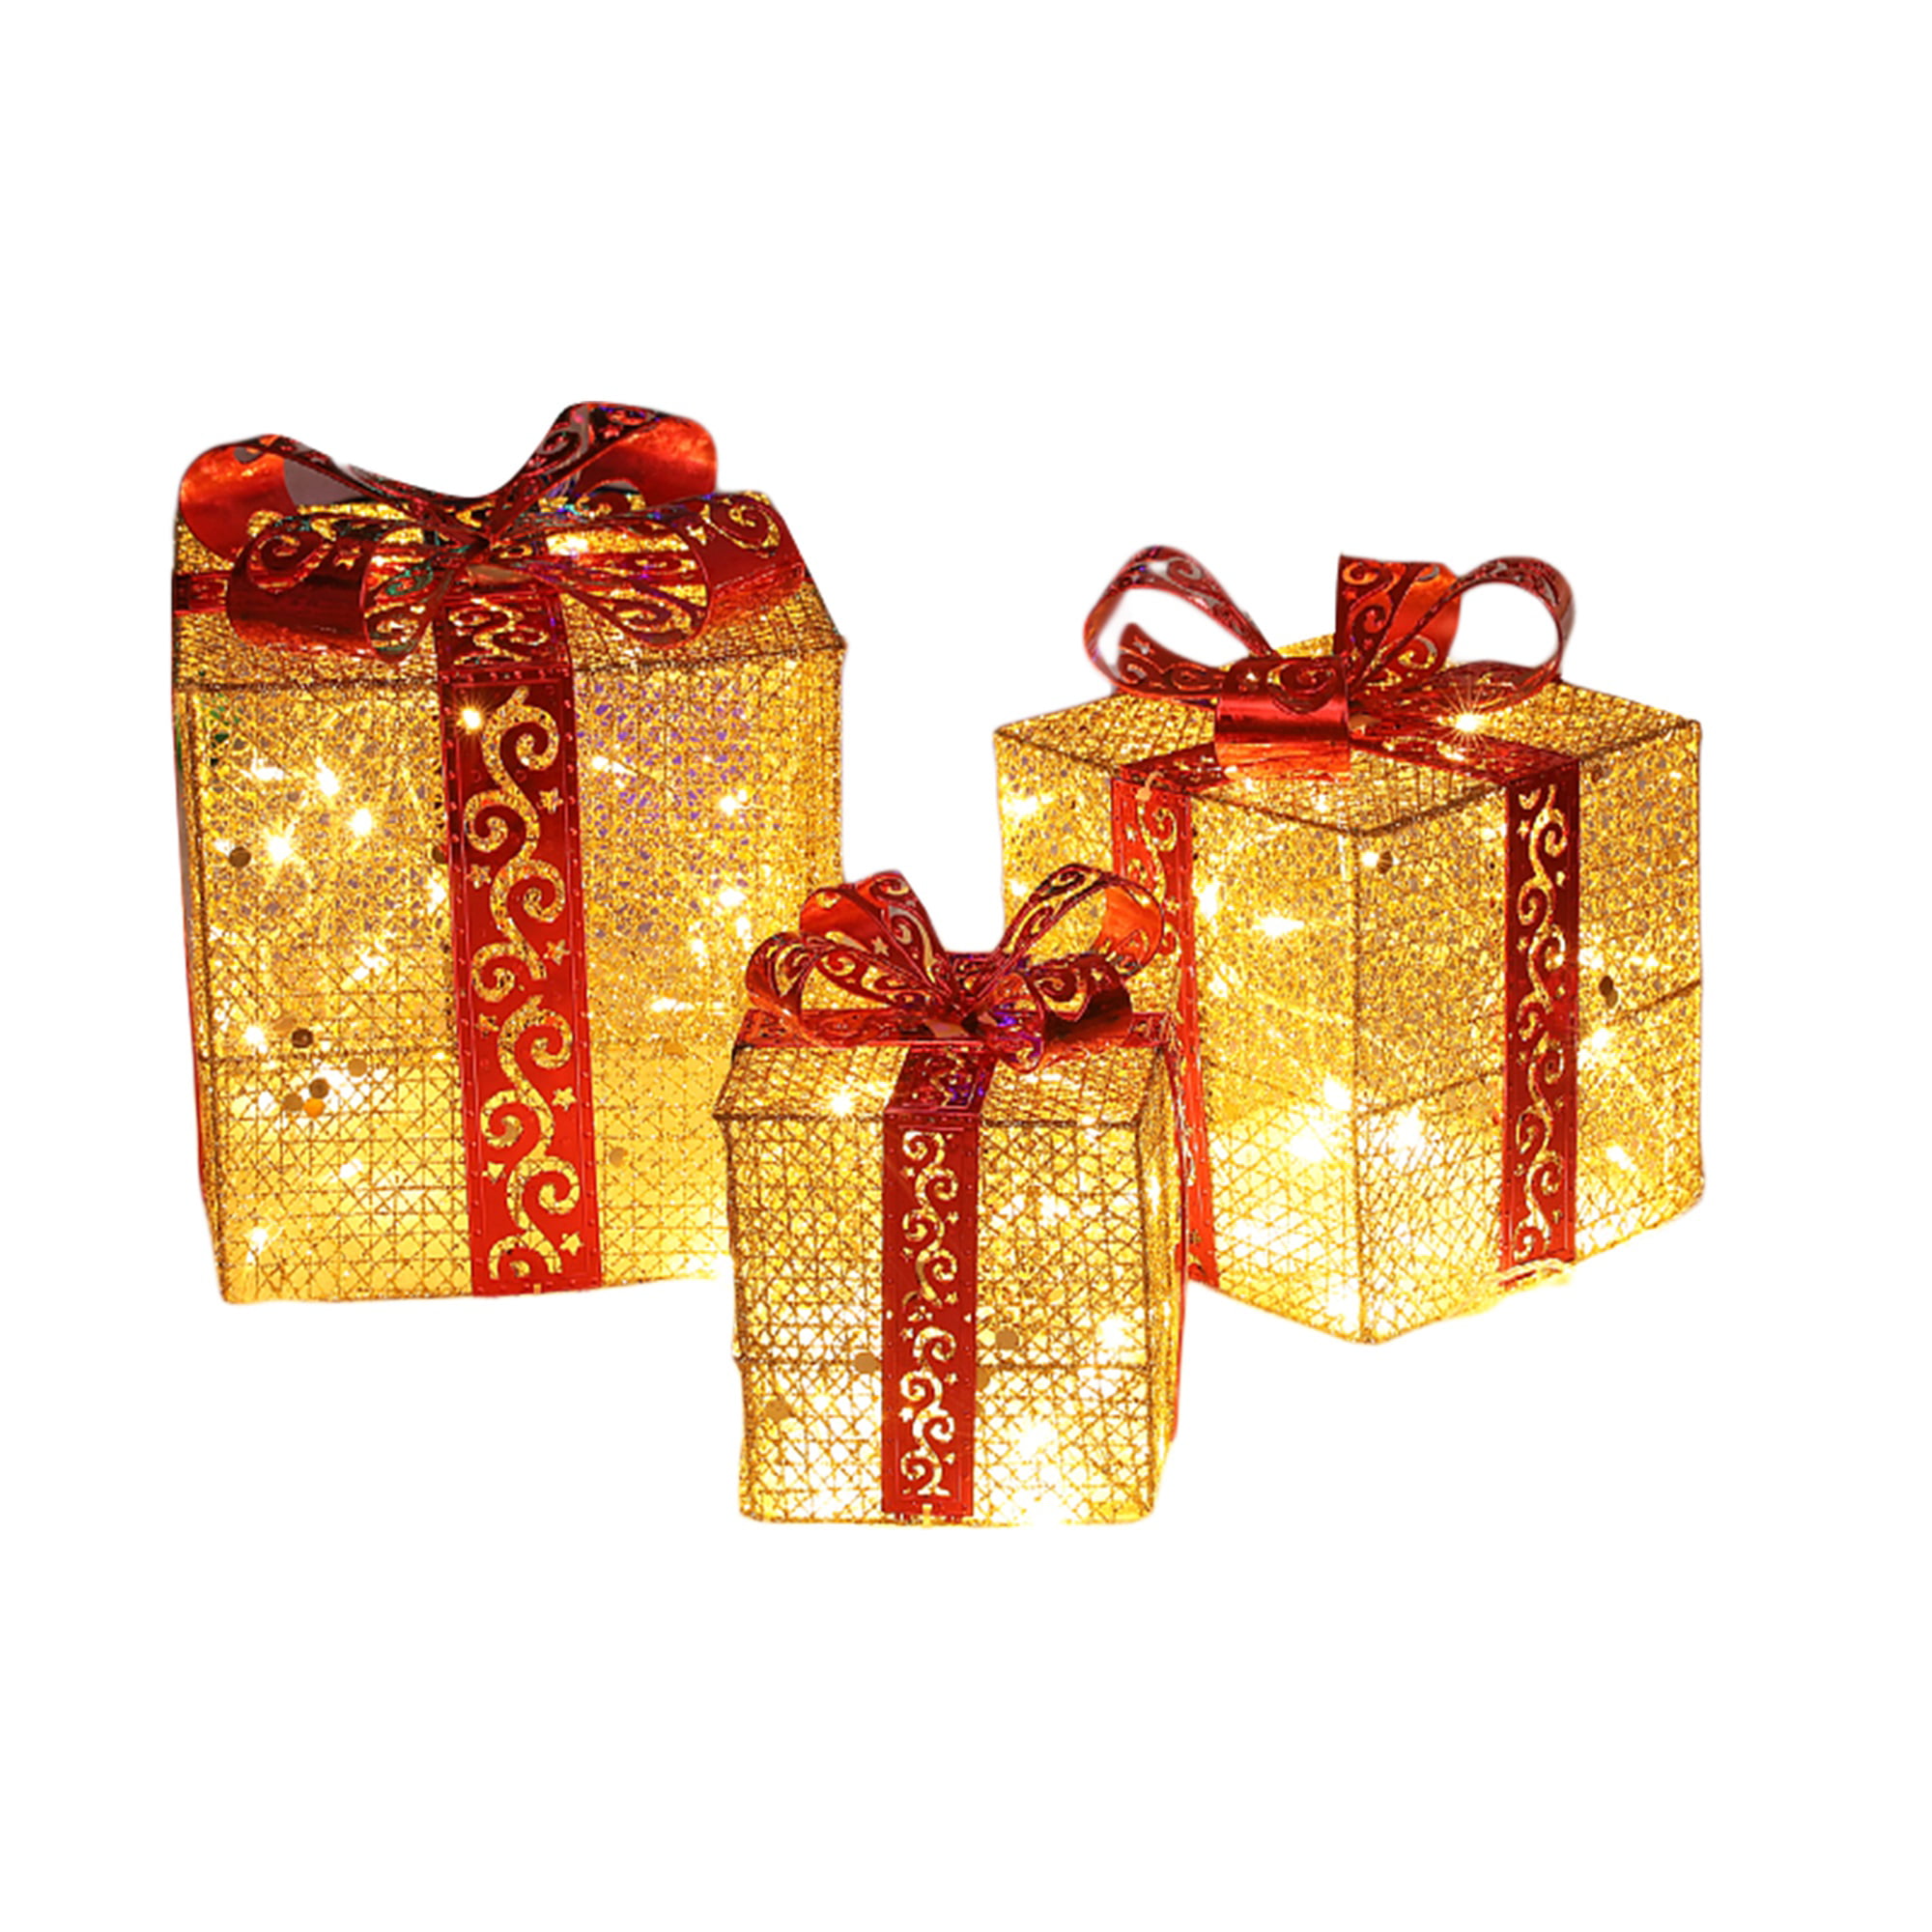 Michellecmm 3Pcs Christmas Lighted Gift Boxes Christmas Decoration ...